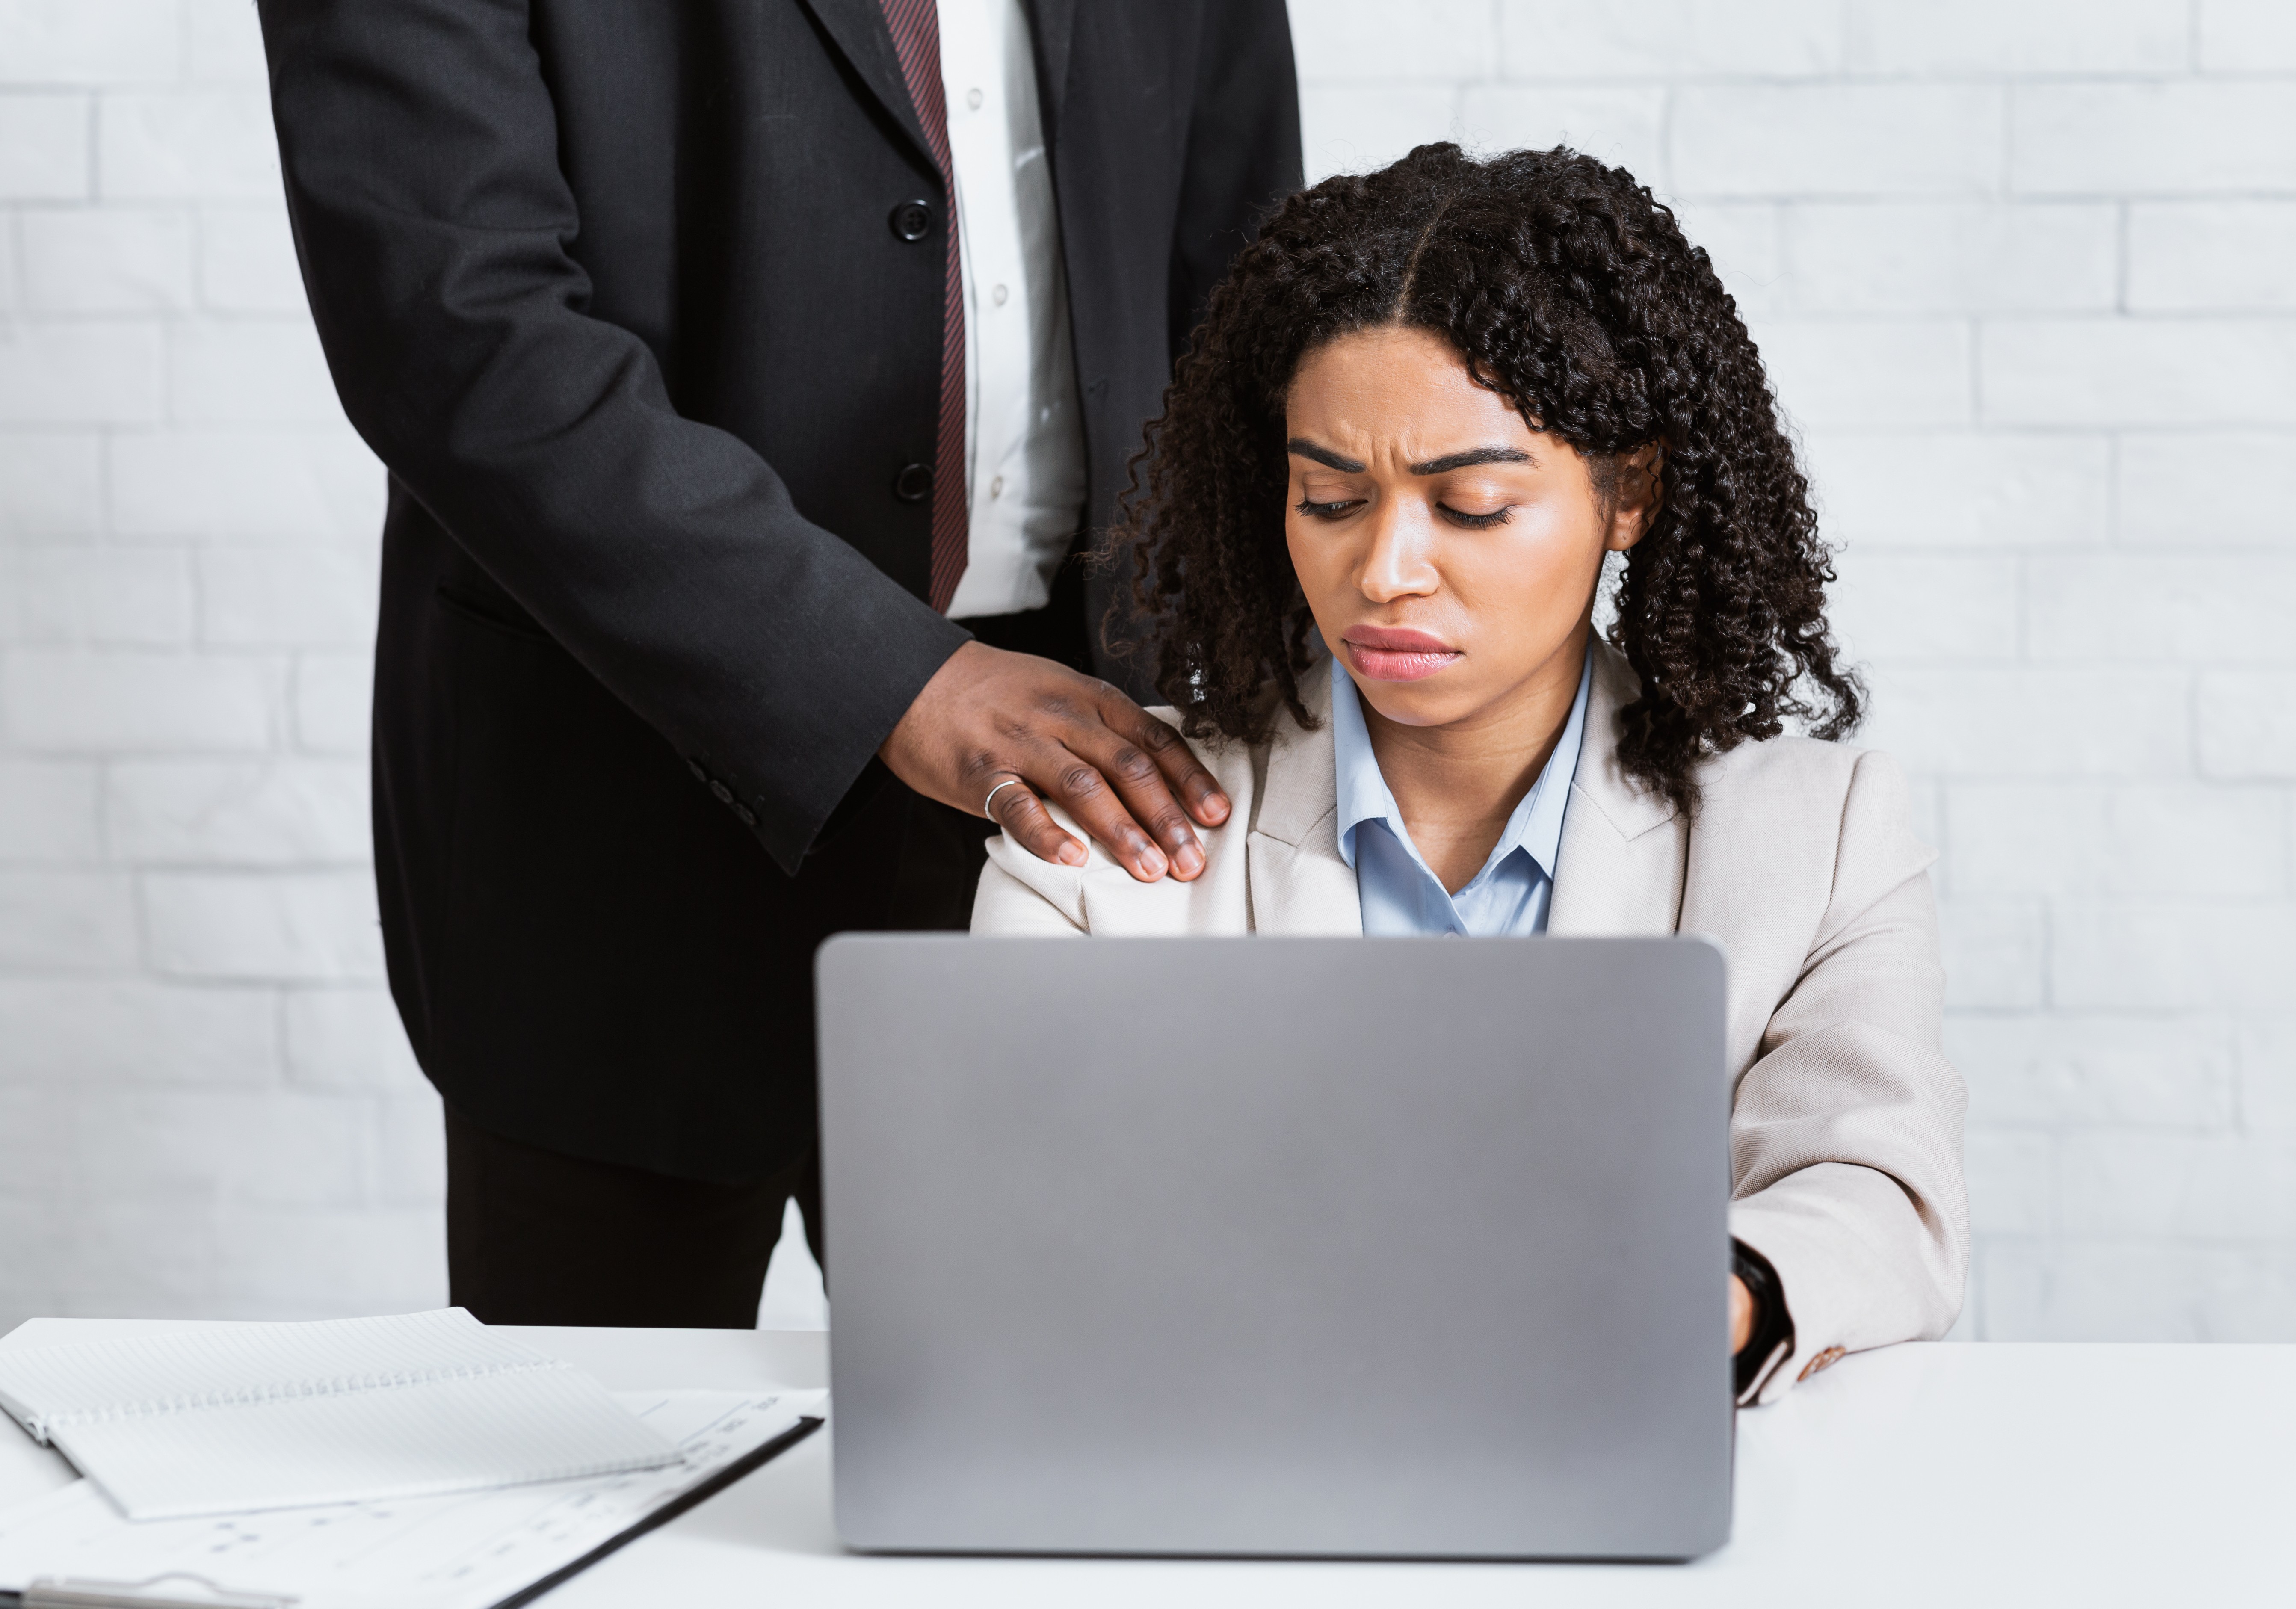 The Best Sexual Harassment Seminar: A Guide For Employers